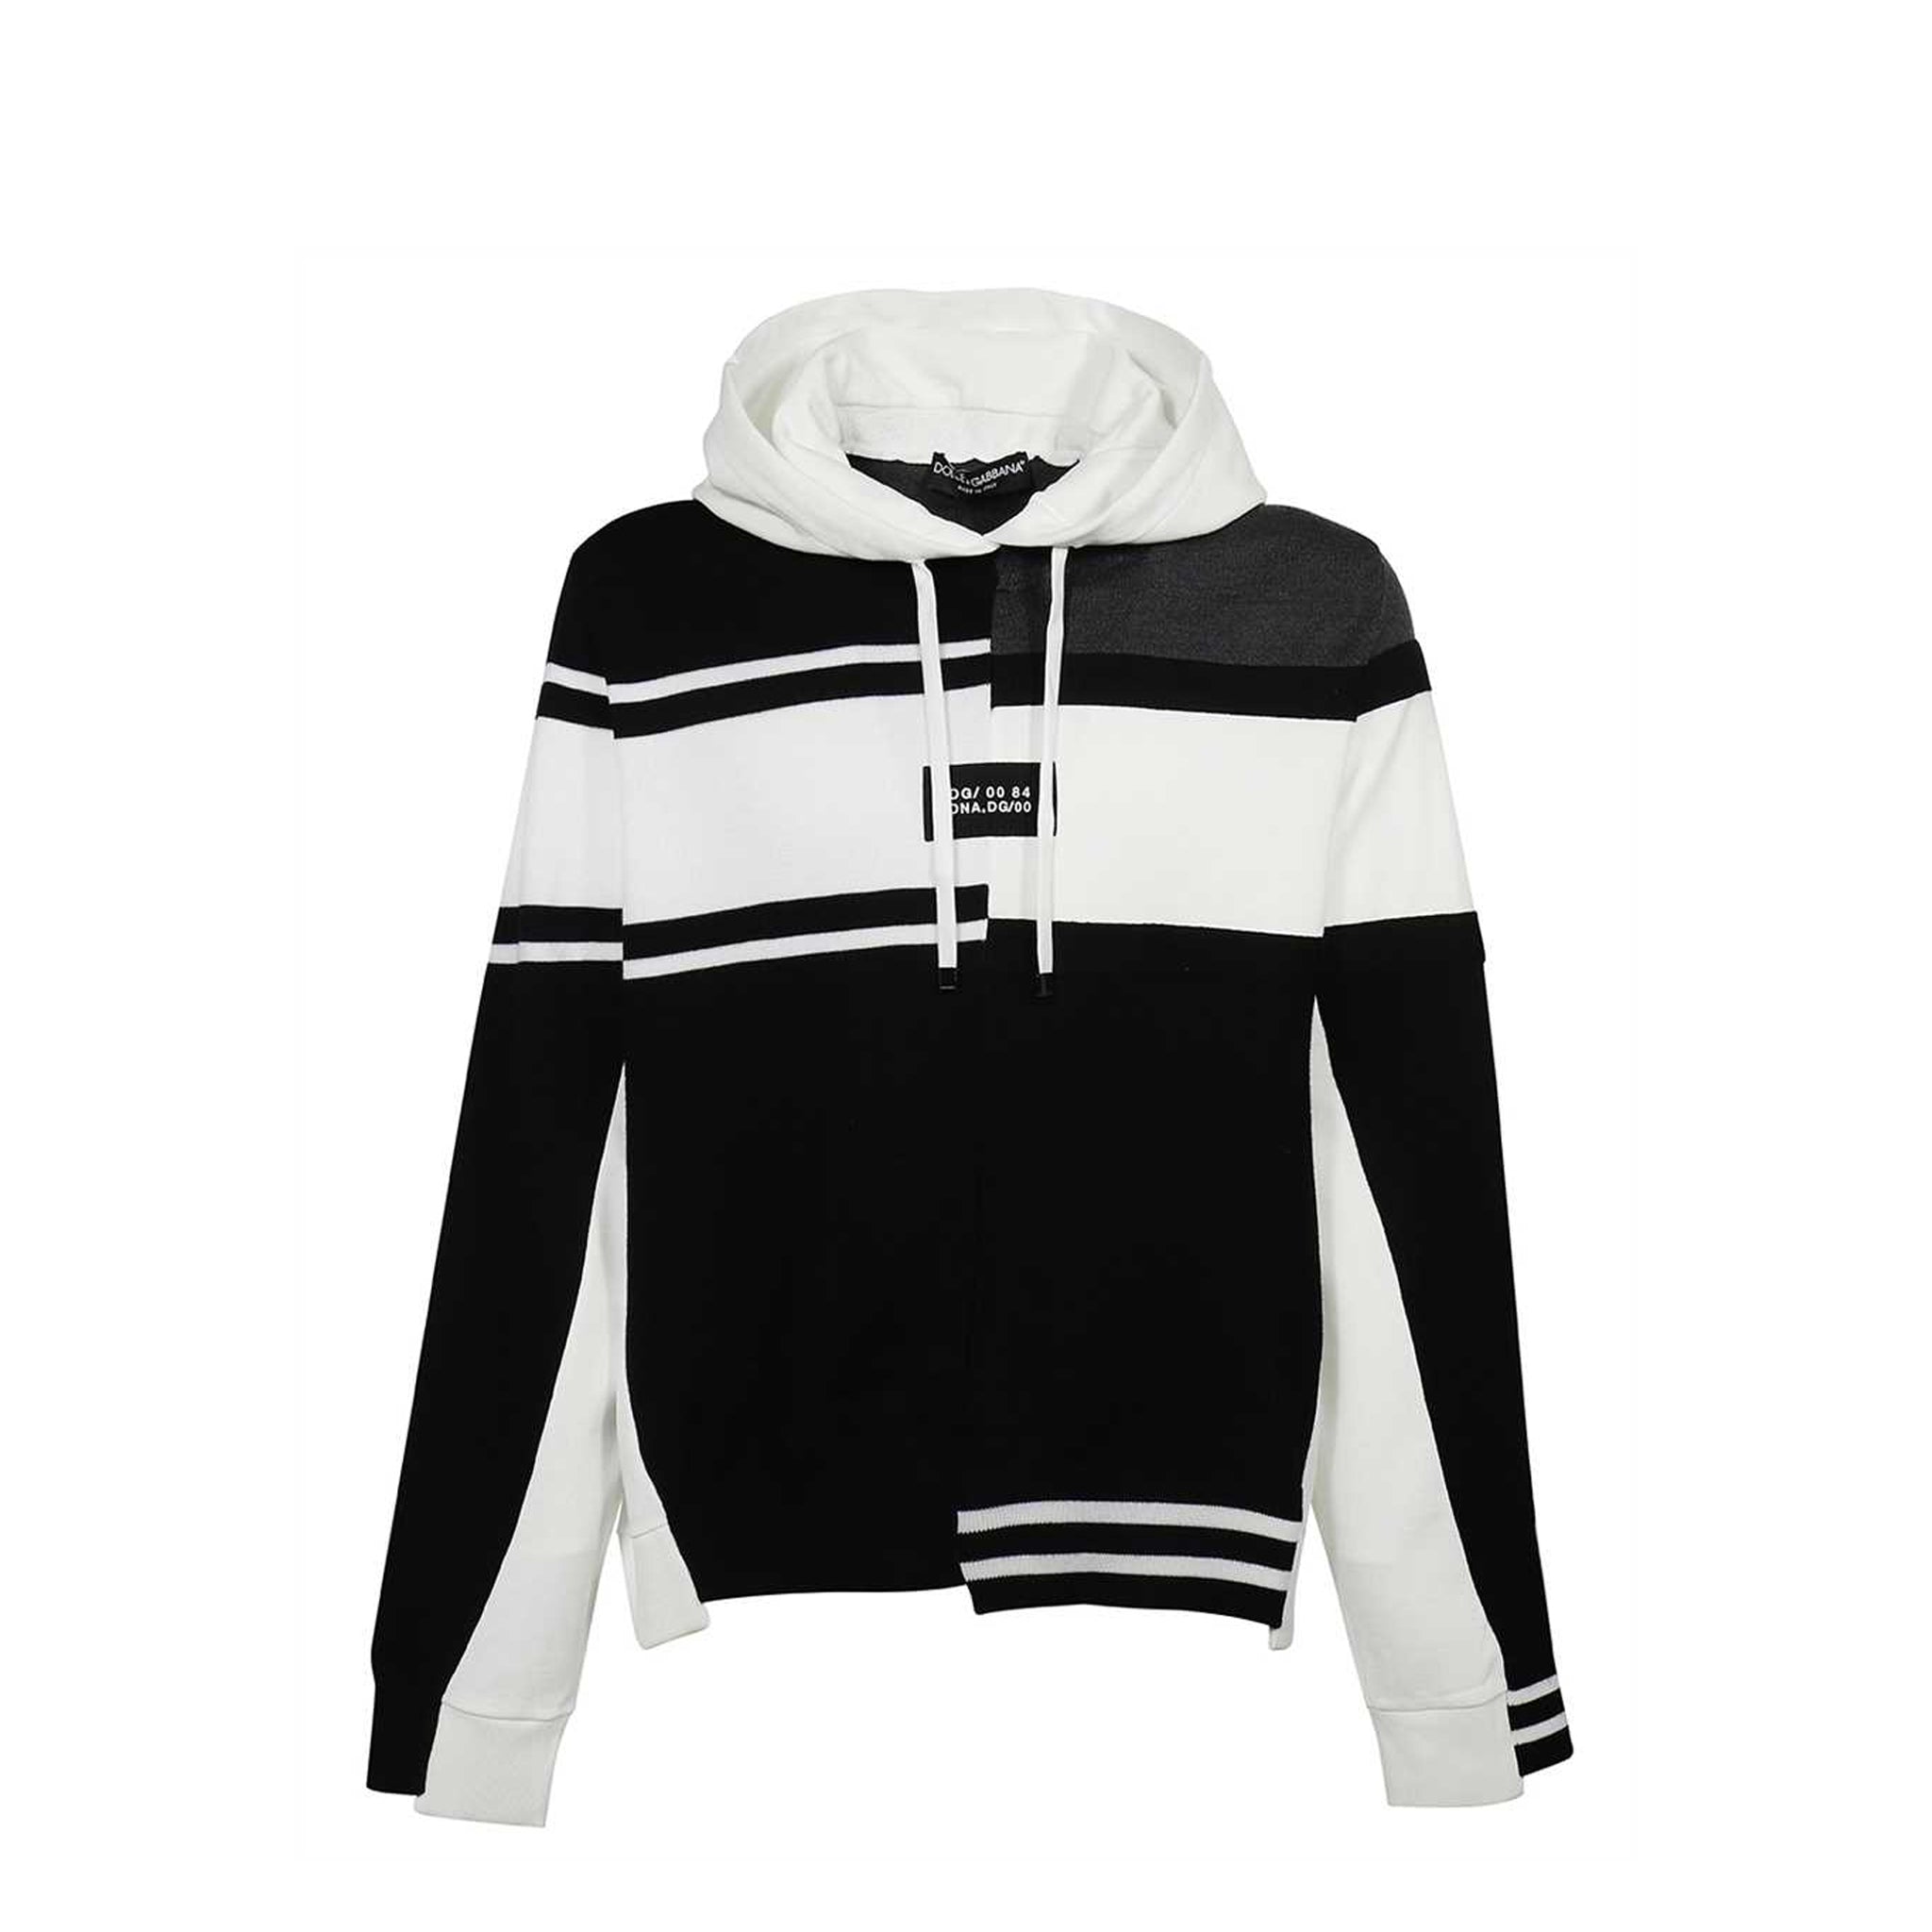 DOLCE-GABBANA-OUTLET-SALE-Dolce-Gabbana-Cotton-Hooded-Sweatshirt-Shirts-ARCHIVE-COLLECTION.jpg